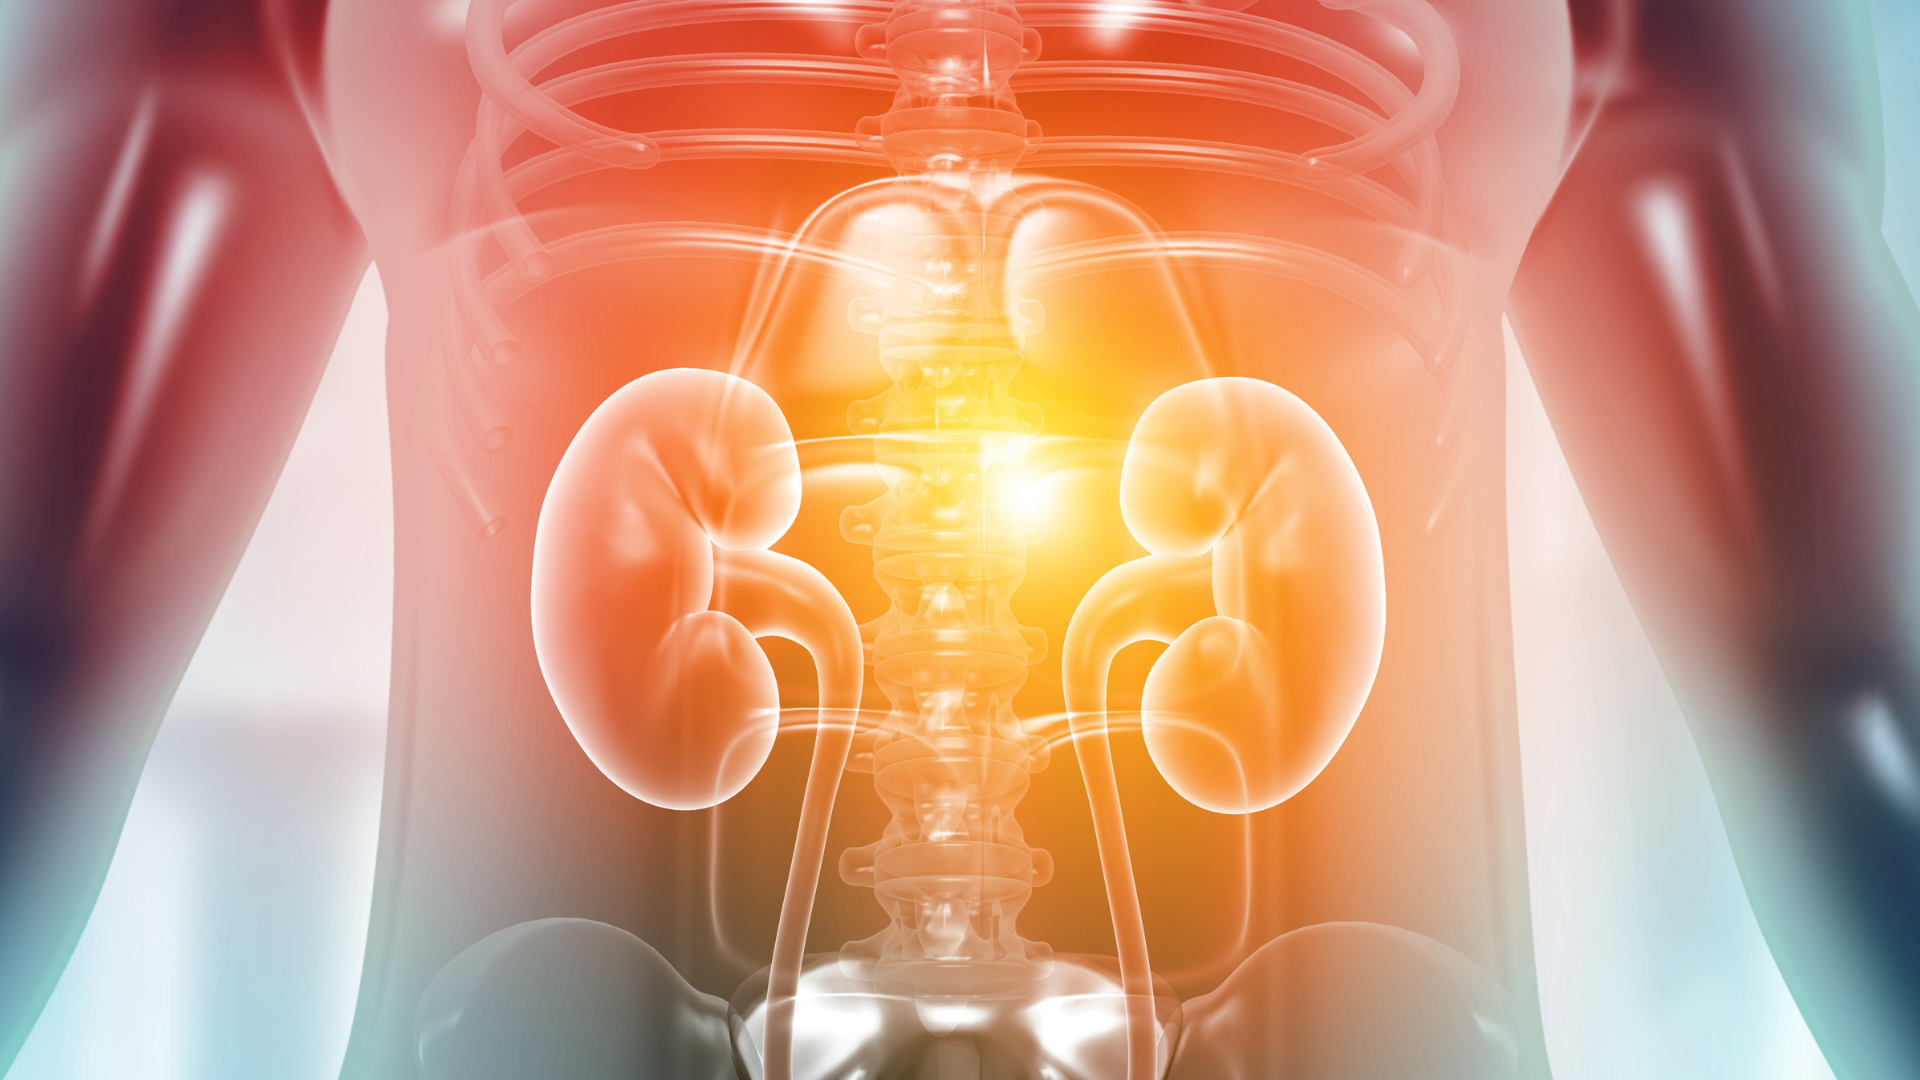 Cover Image for 10 Reasons Why Monitoring Your Kidney Health is Crucial for a Healthy Life